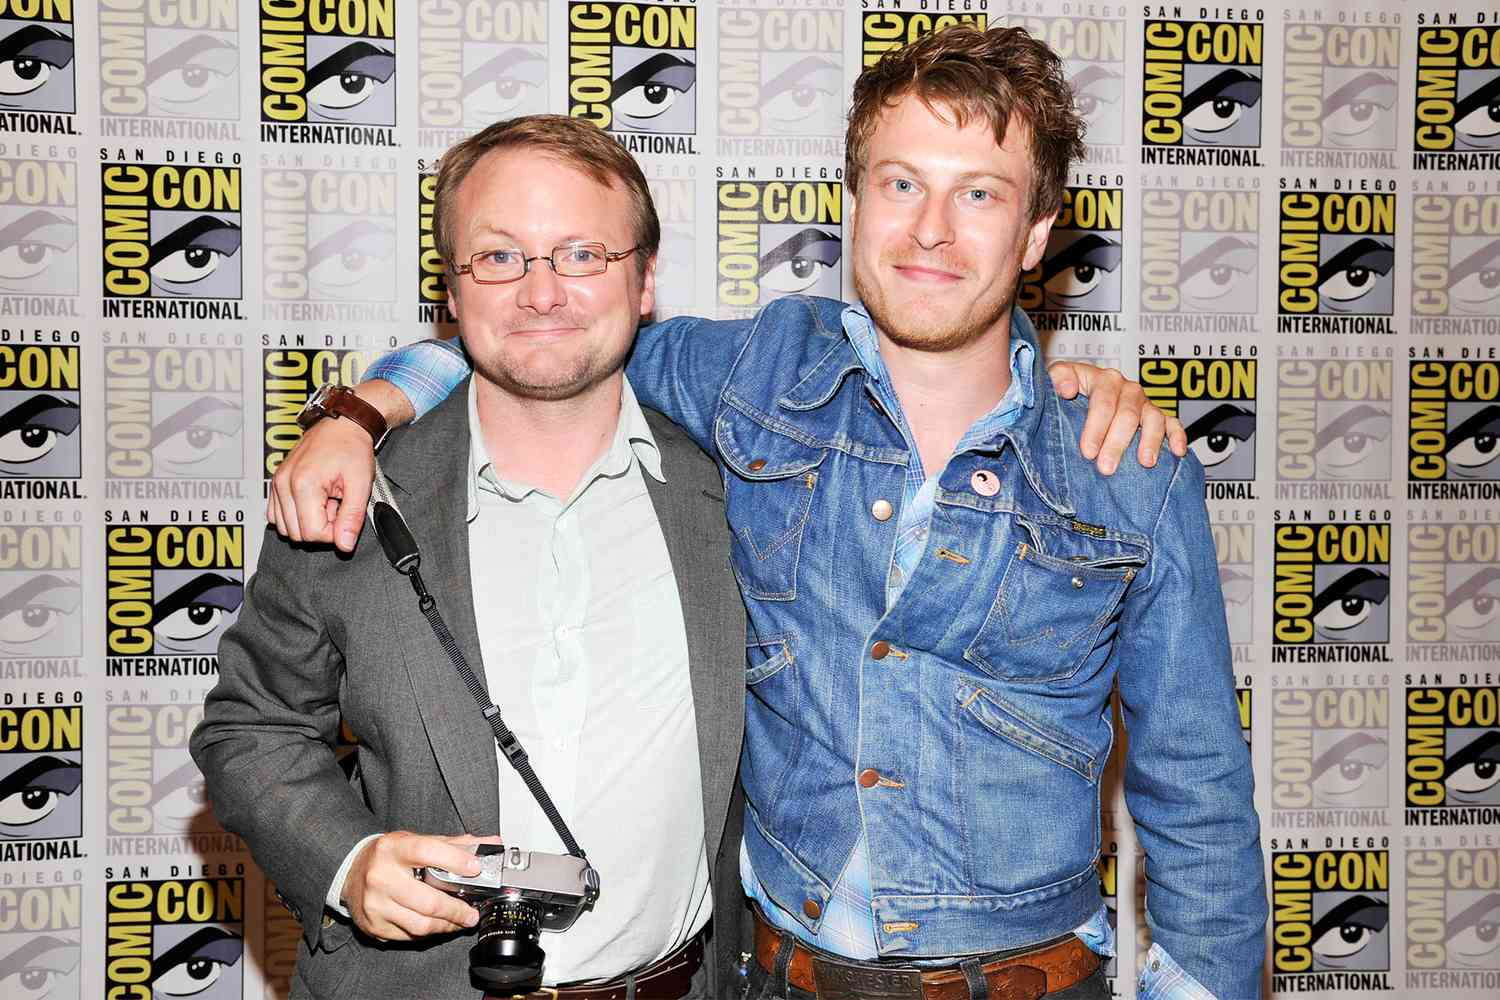 Director Rian Johnson and Noah Segan at Sony Pictures Panels At Comic-Con Convention 2012 at San Diego Convention Center on July 13, 2012 in San Diego, California. Rian Johnson Noah Segan Sony Pictures Panels At Comic-Con Convention 2012 San Diego America.